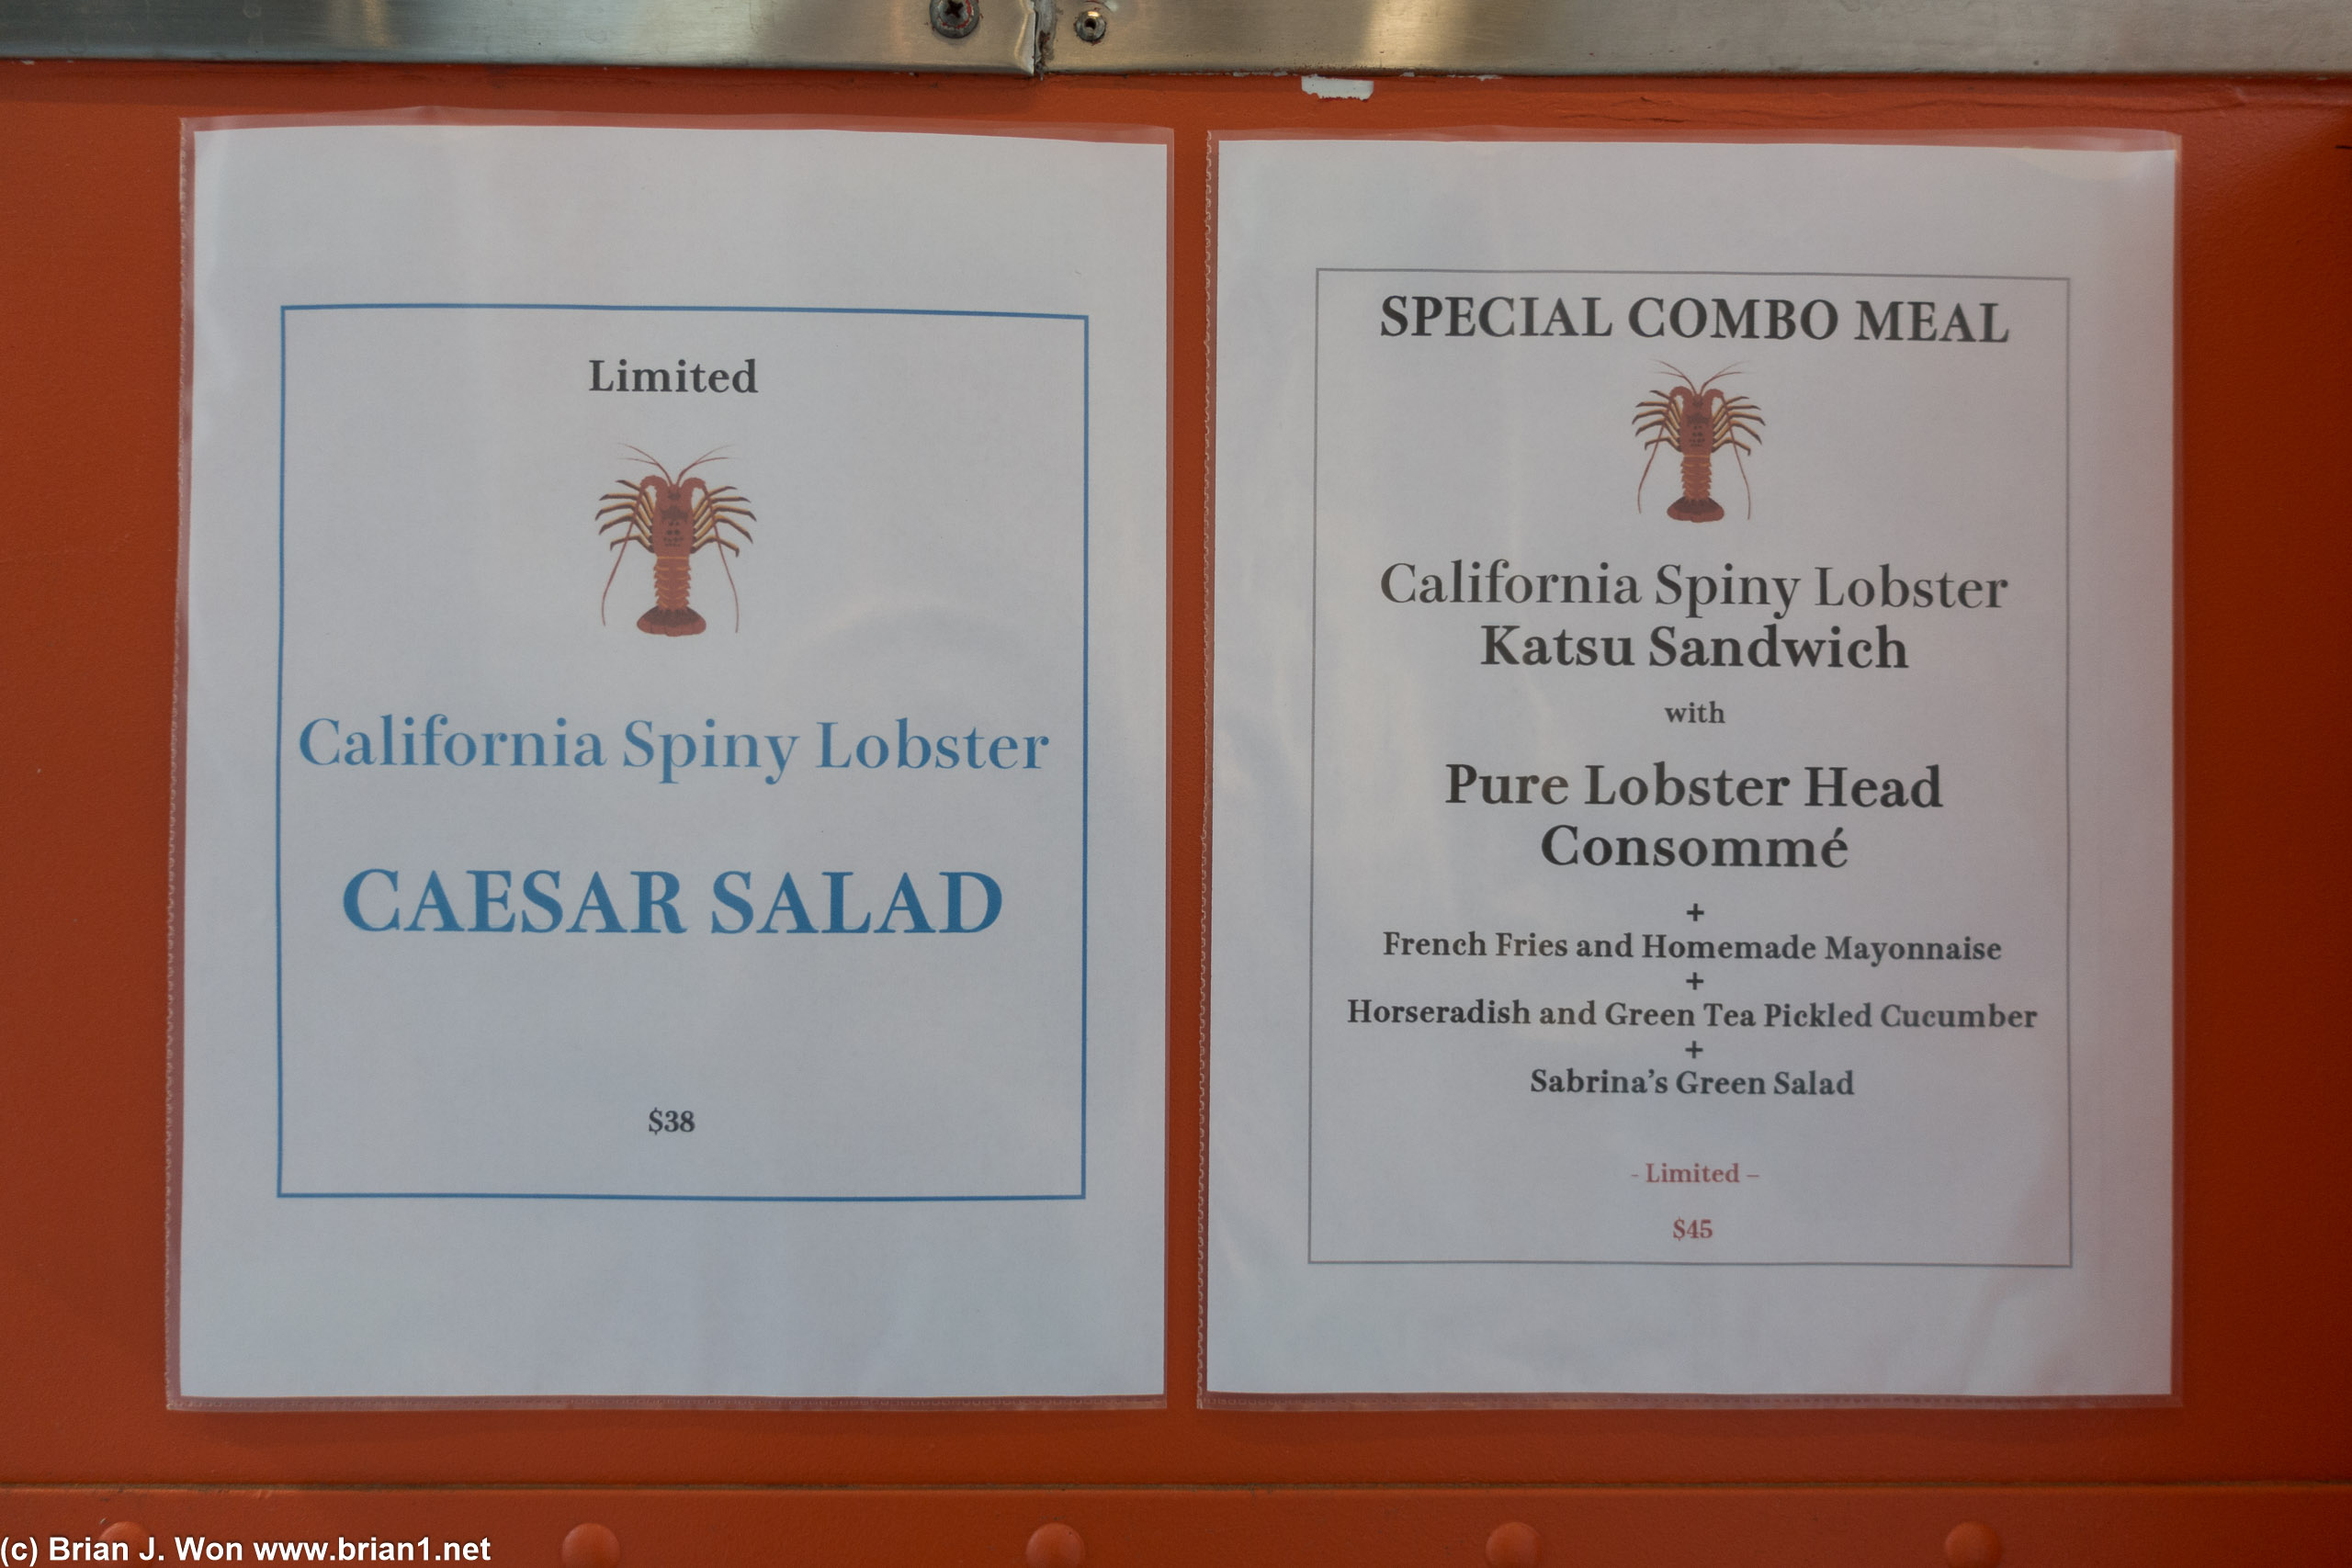 California spiny lobster on the menu.